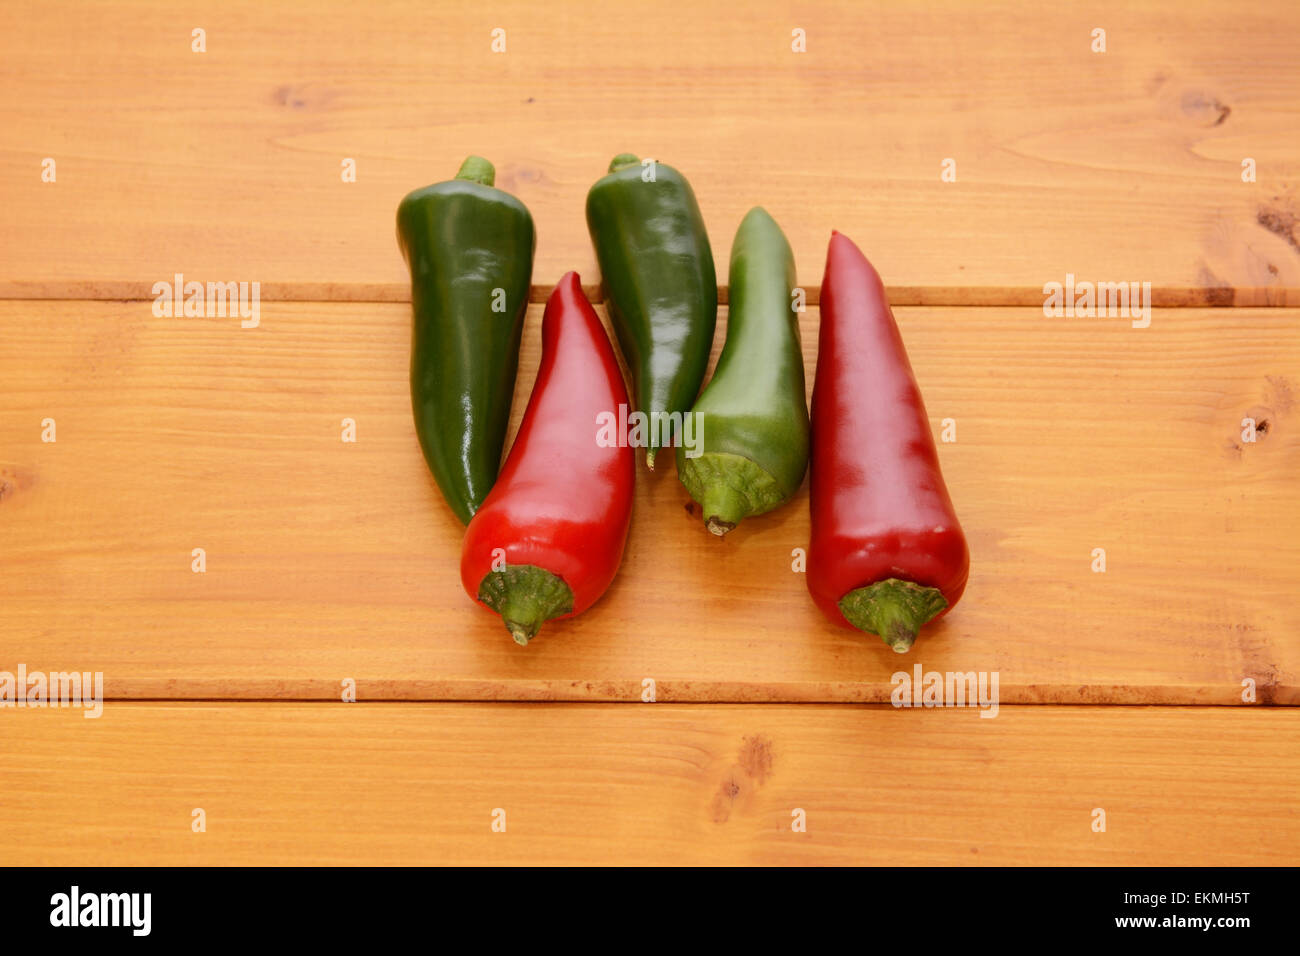 Five red and green hot chillis on a wooden table Stock Photo